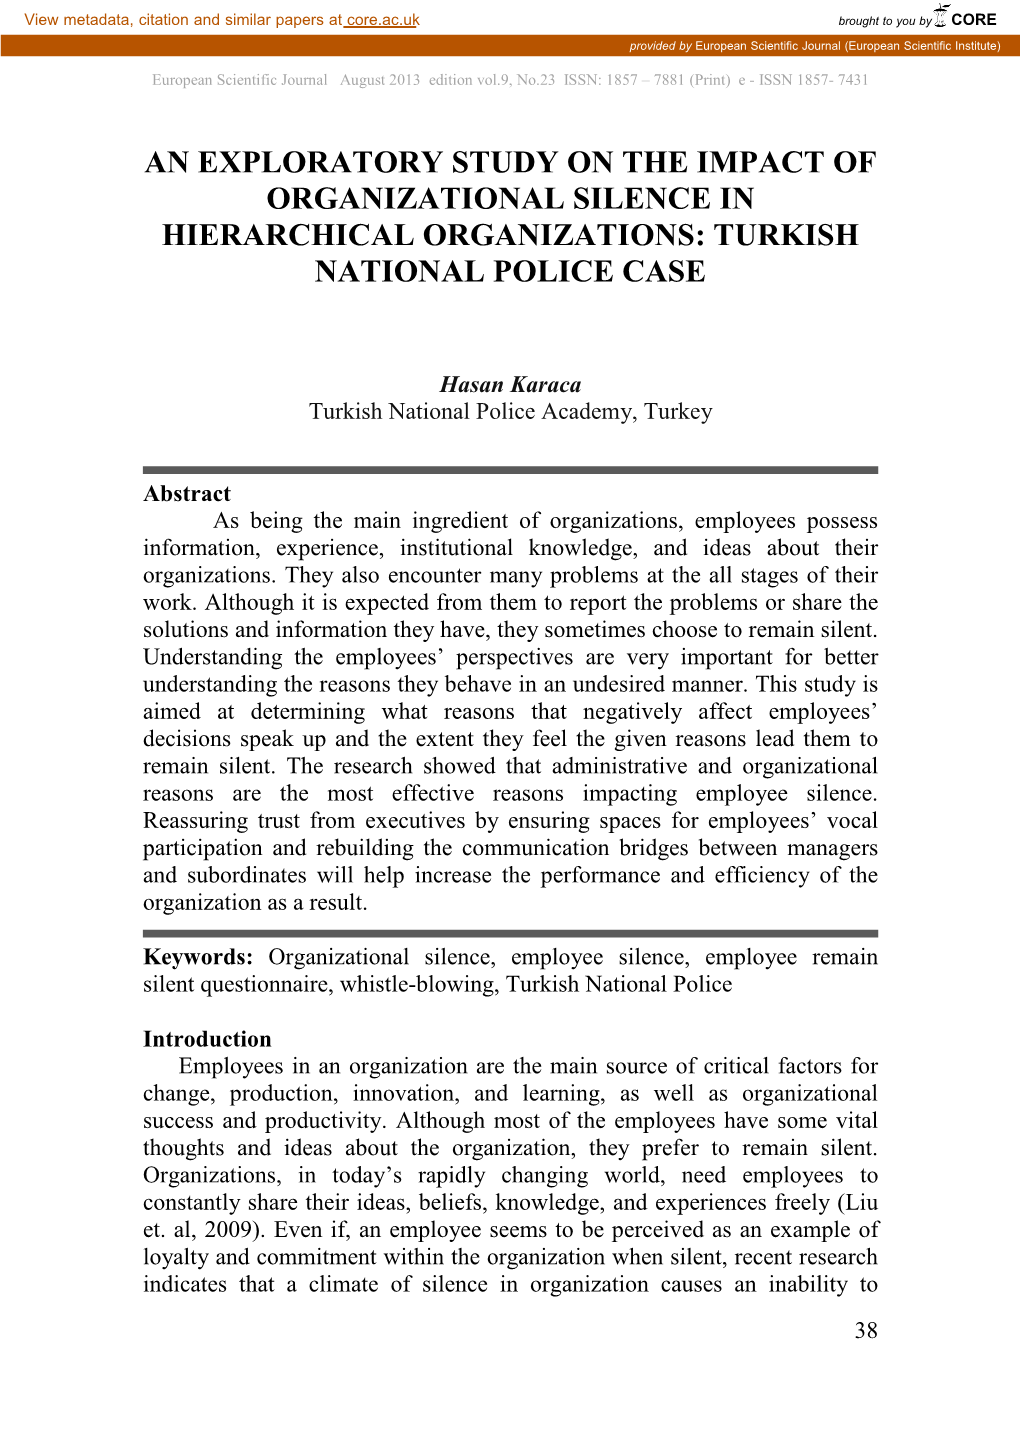 An Exploratory Study on the Impact of Organizational Silence in Hierarchical Organizations: Turkish National Police Case